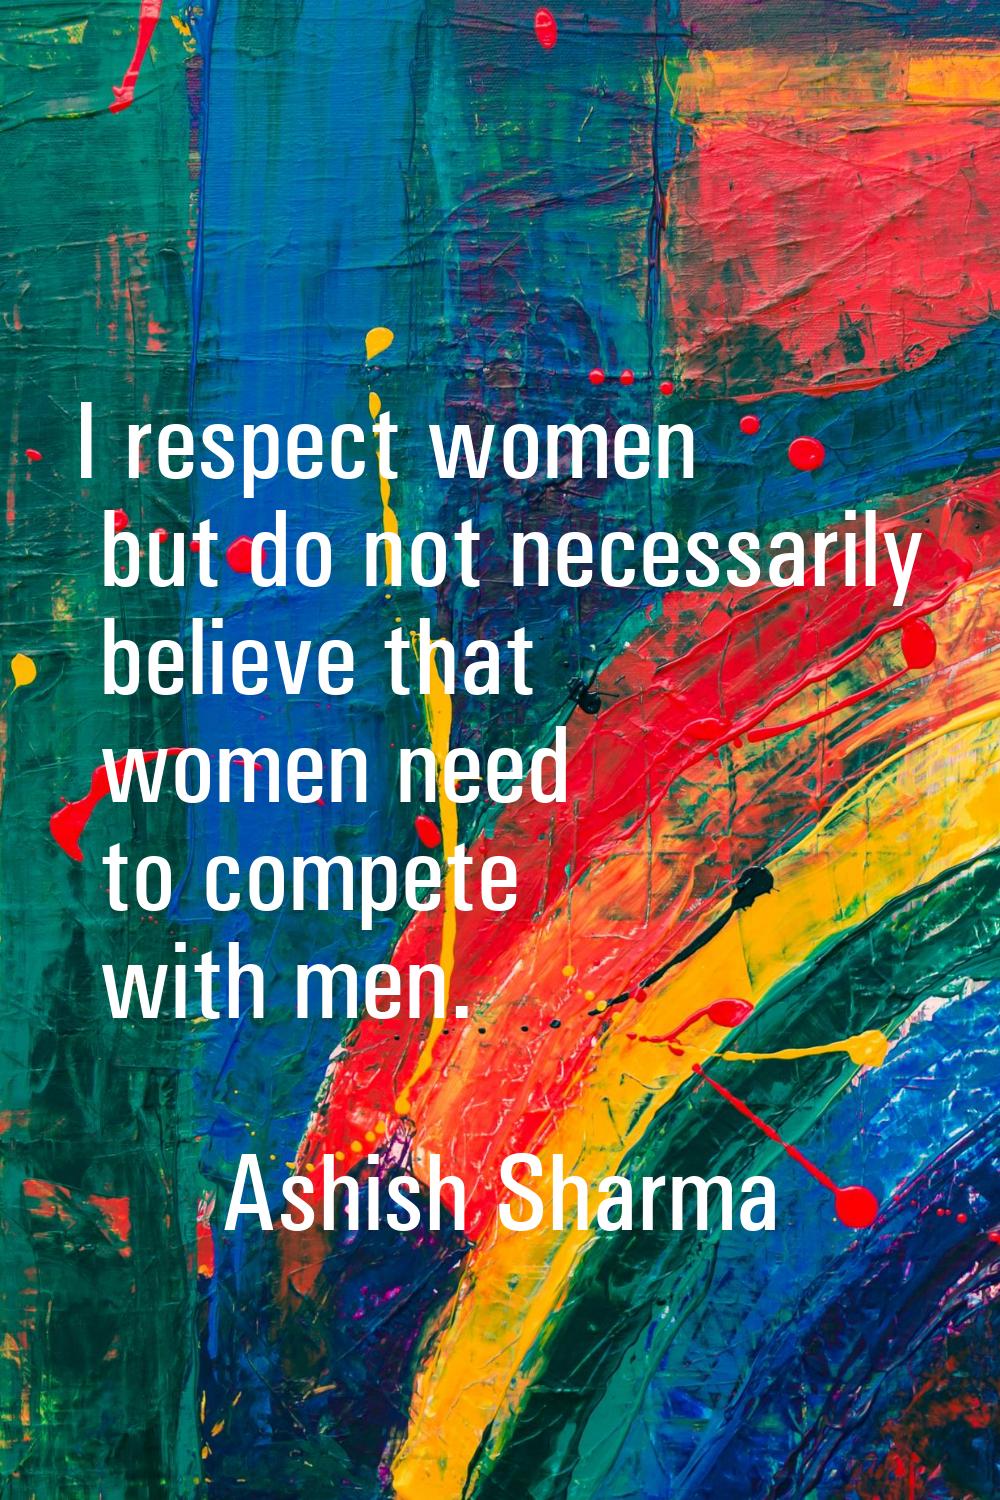 I respect women but do not necessarily believe that women need to compete with men.